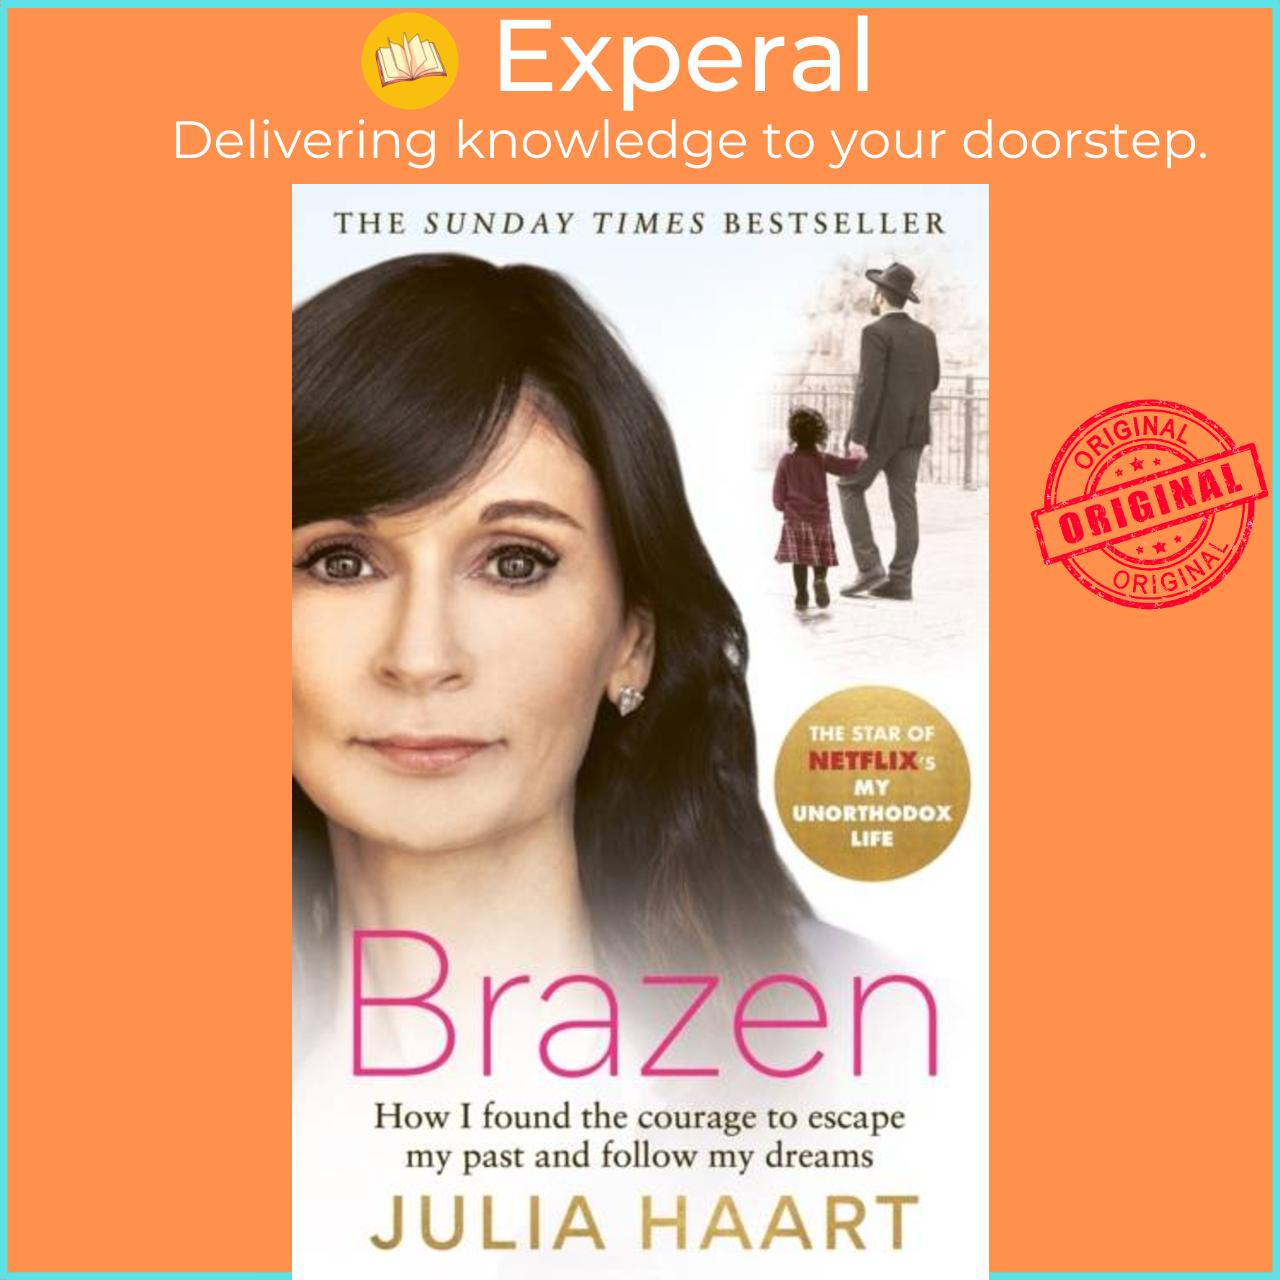 Hình ảnh Sách - Brazen - THE SUNDAY TIMES BESTSELLING MEMOIR FROM THE STAR OF NETFLIX'S MY by Julia Haart (UK edition, paperback)